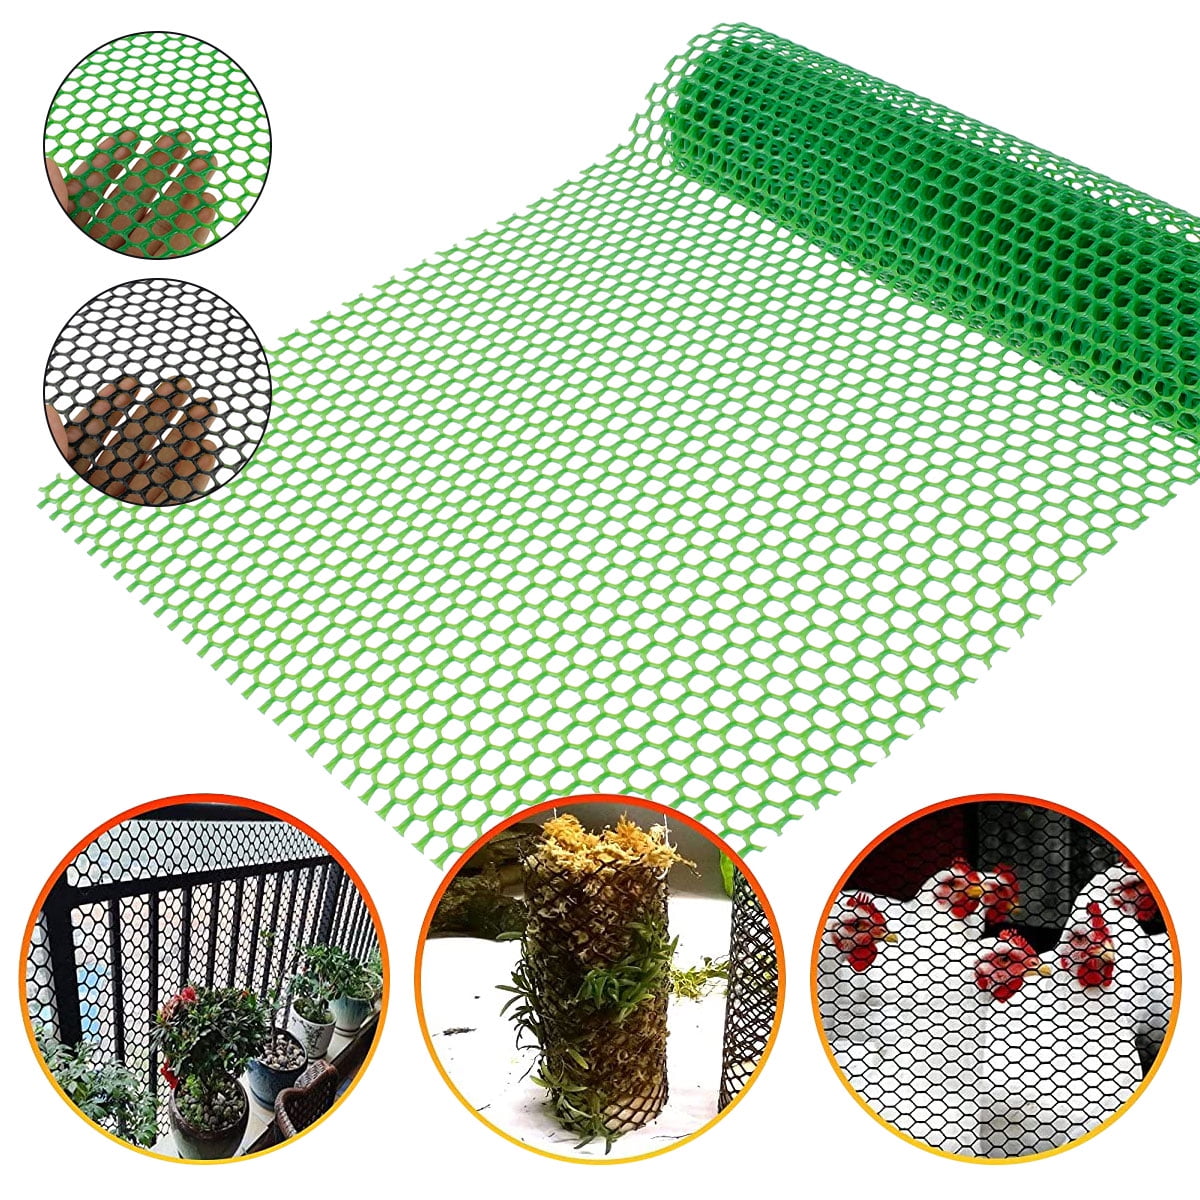 GardenNow Upgraded 15.7IN x 33FT ABS Plastic Chicken Wire Fence Mesh,  Poultry Fencing, Hexagonal Fencing Wire for Gardening, Construction Barrier